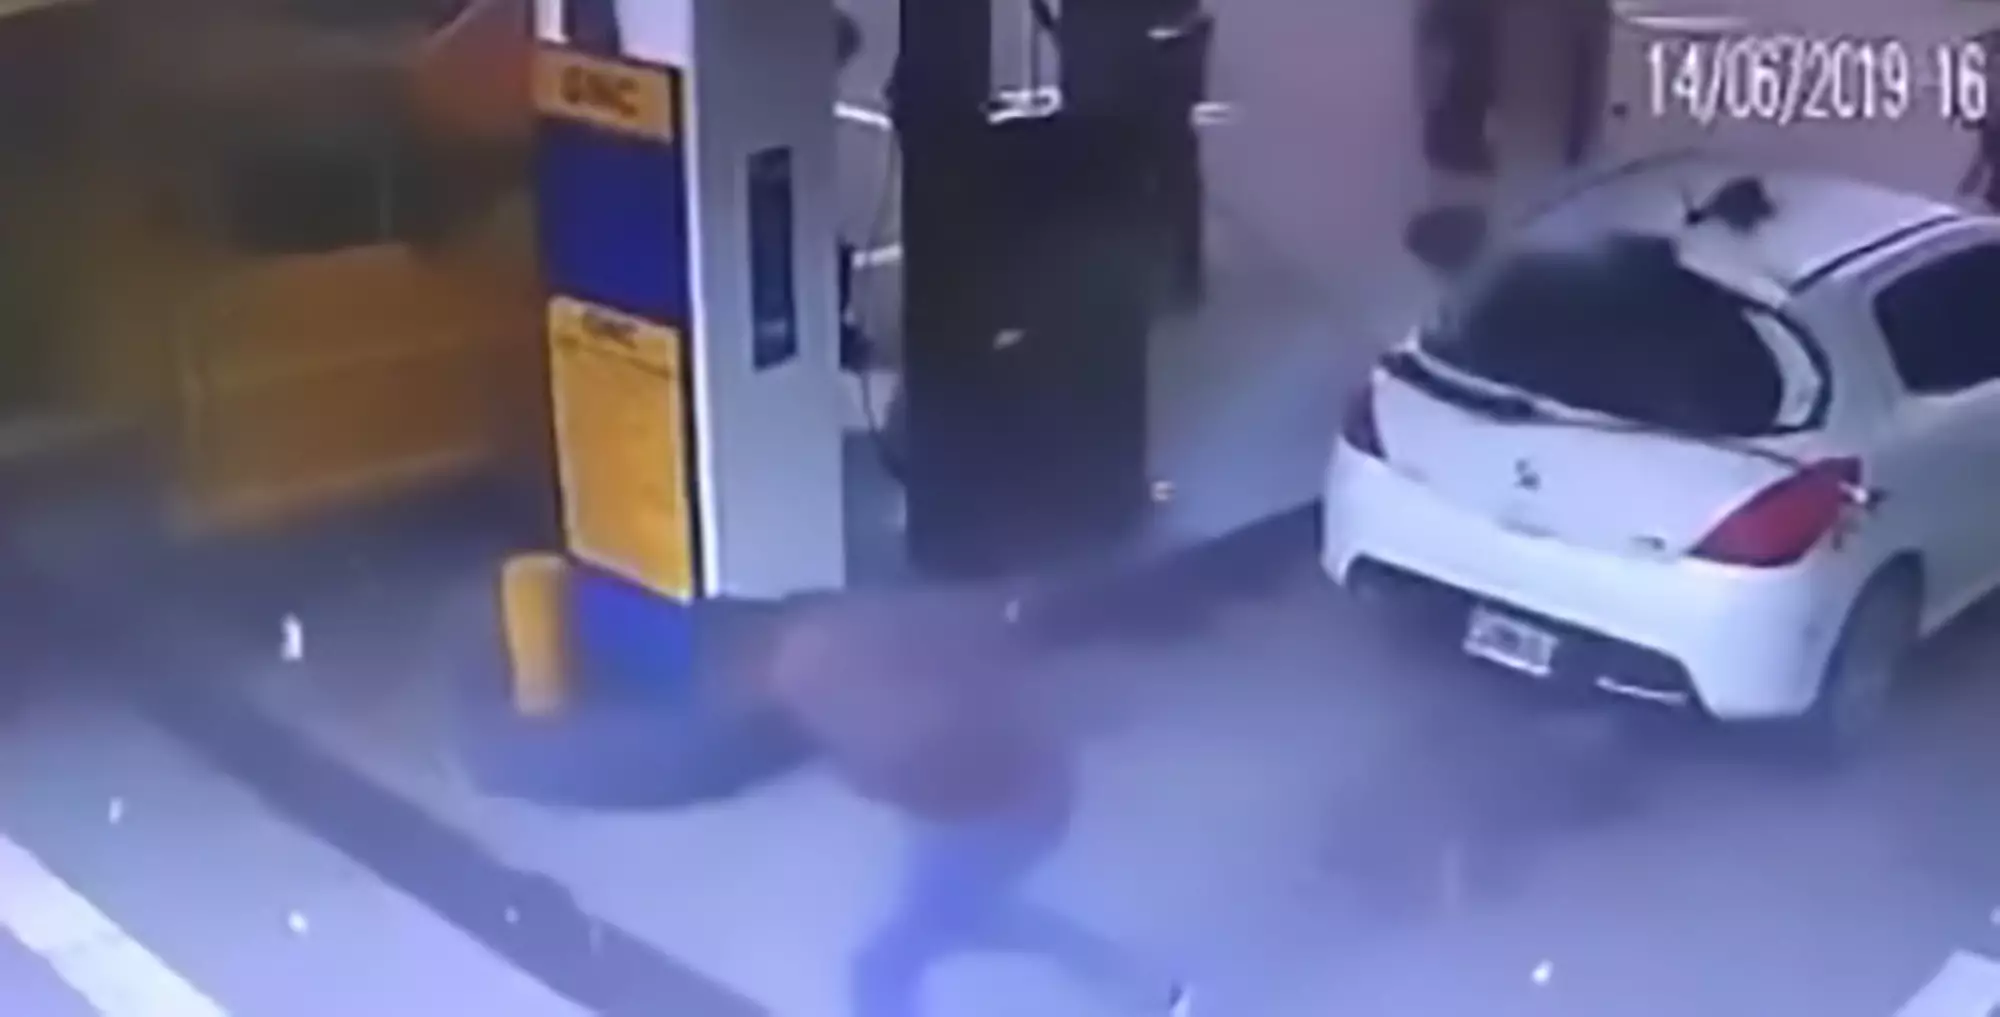 The petrol station attendant was filling the car up when the blast occurred.